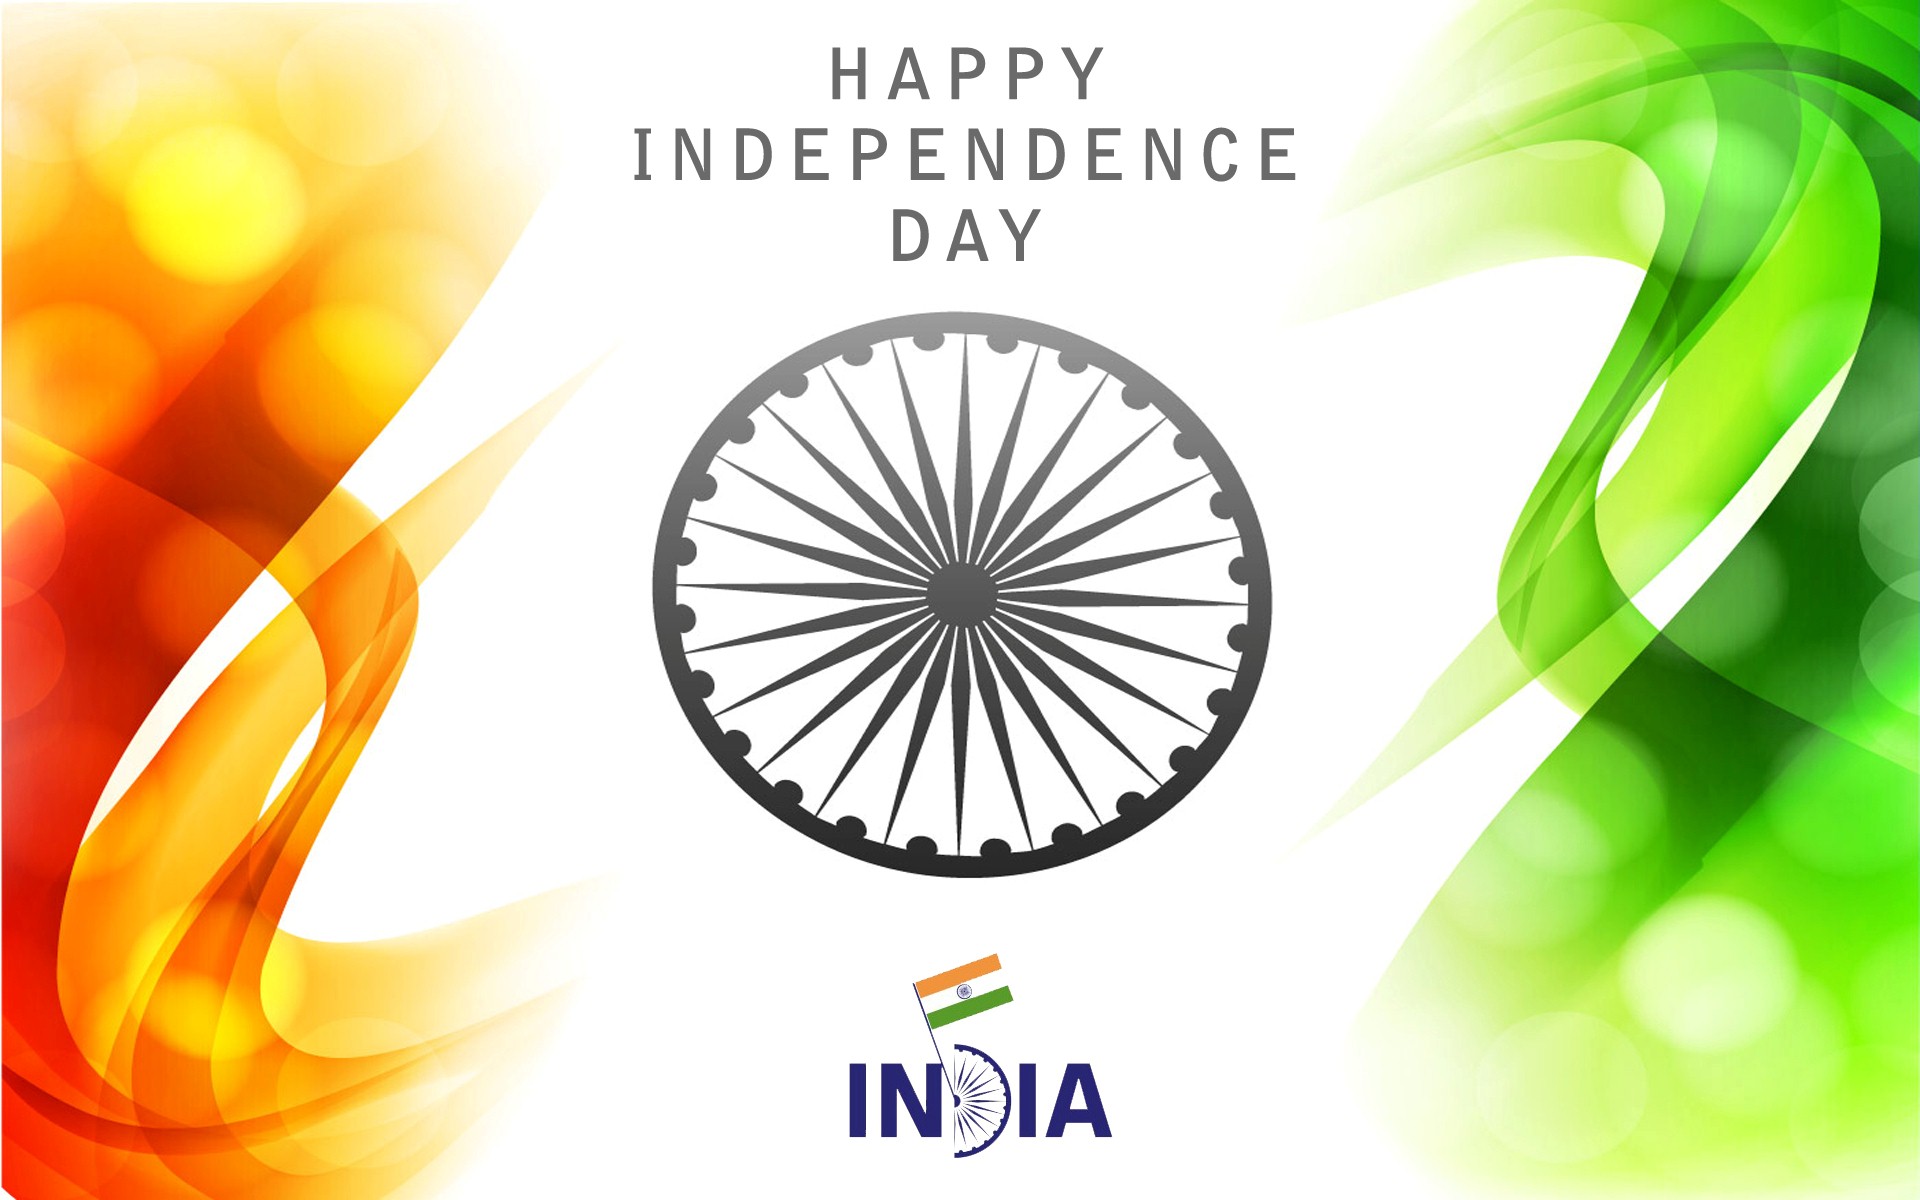 Happy Independence Day Wallpaper - Background Independence Day India -  1920x1200 Wallpaper 